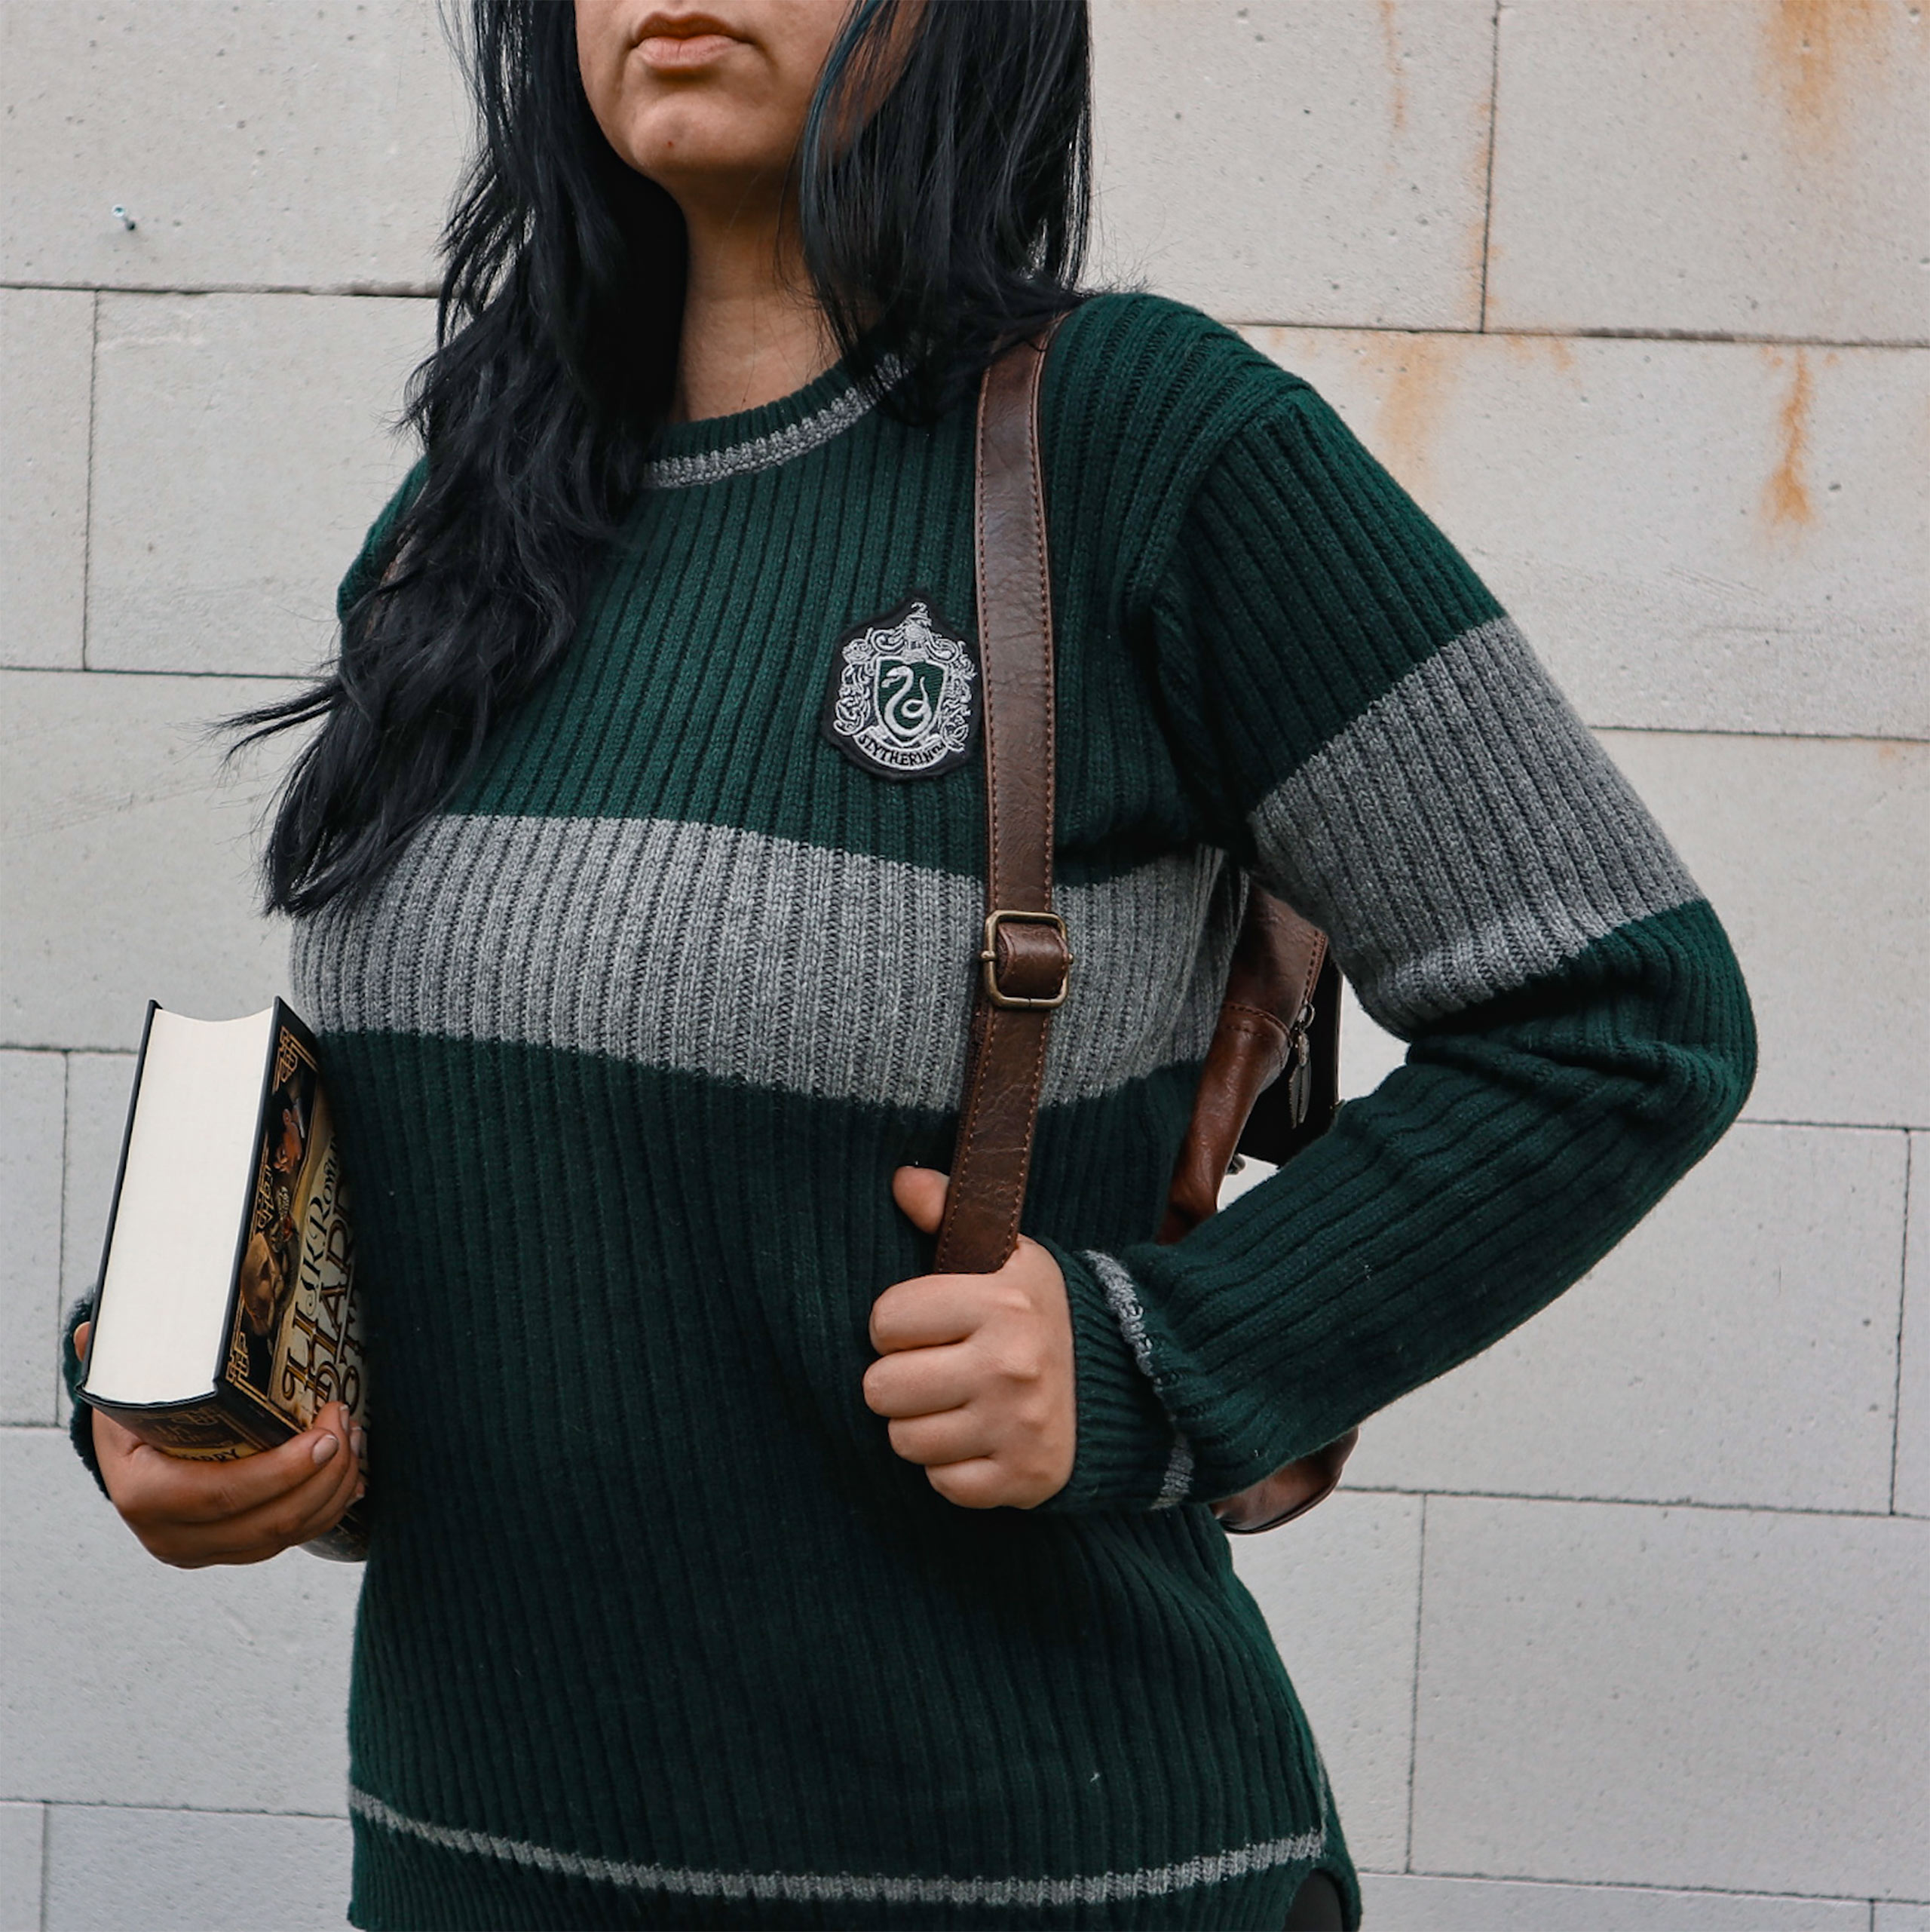 Harry Potter - Quidditch Sweater Slytherin